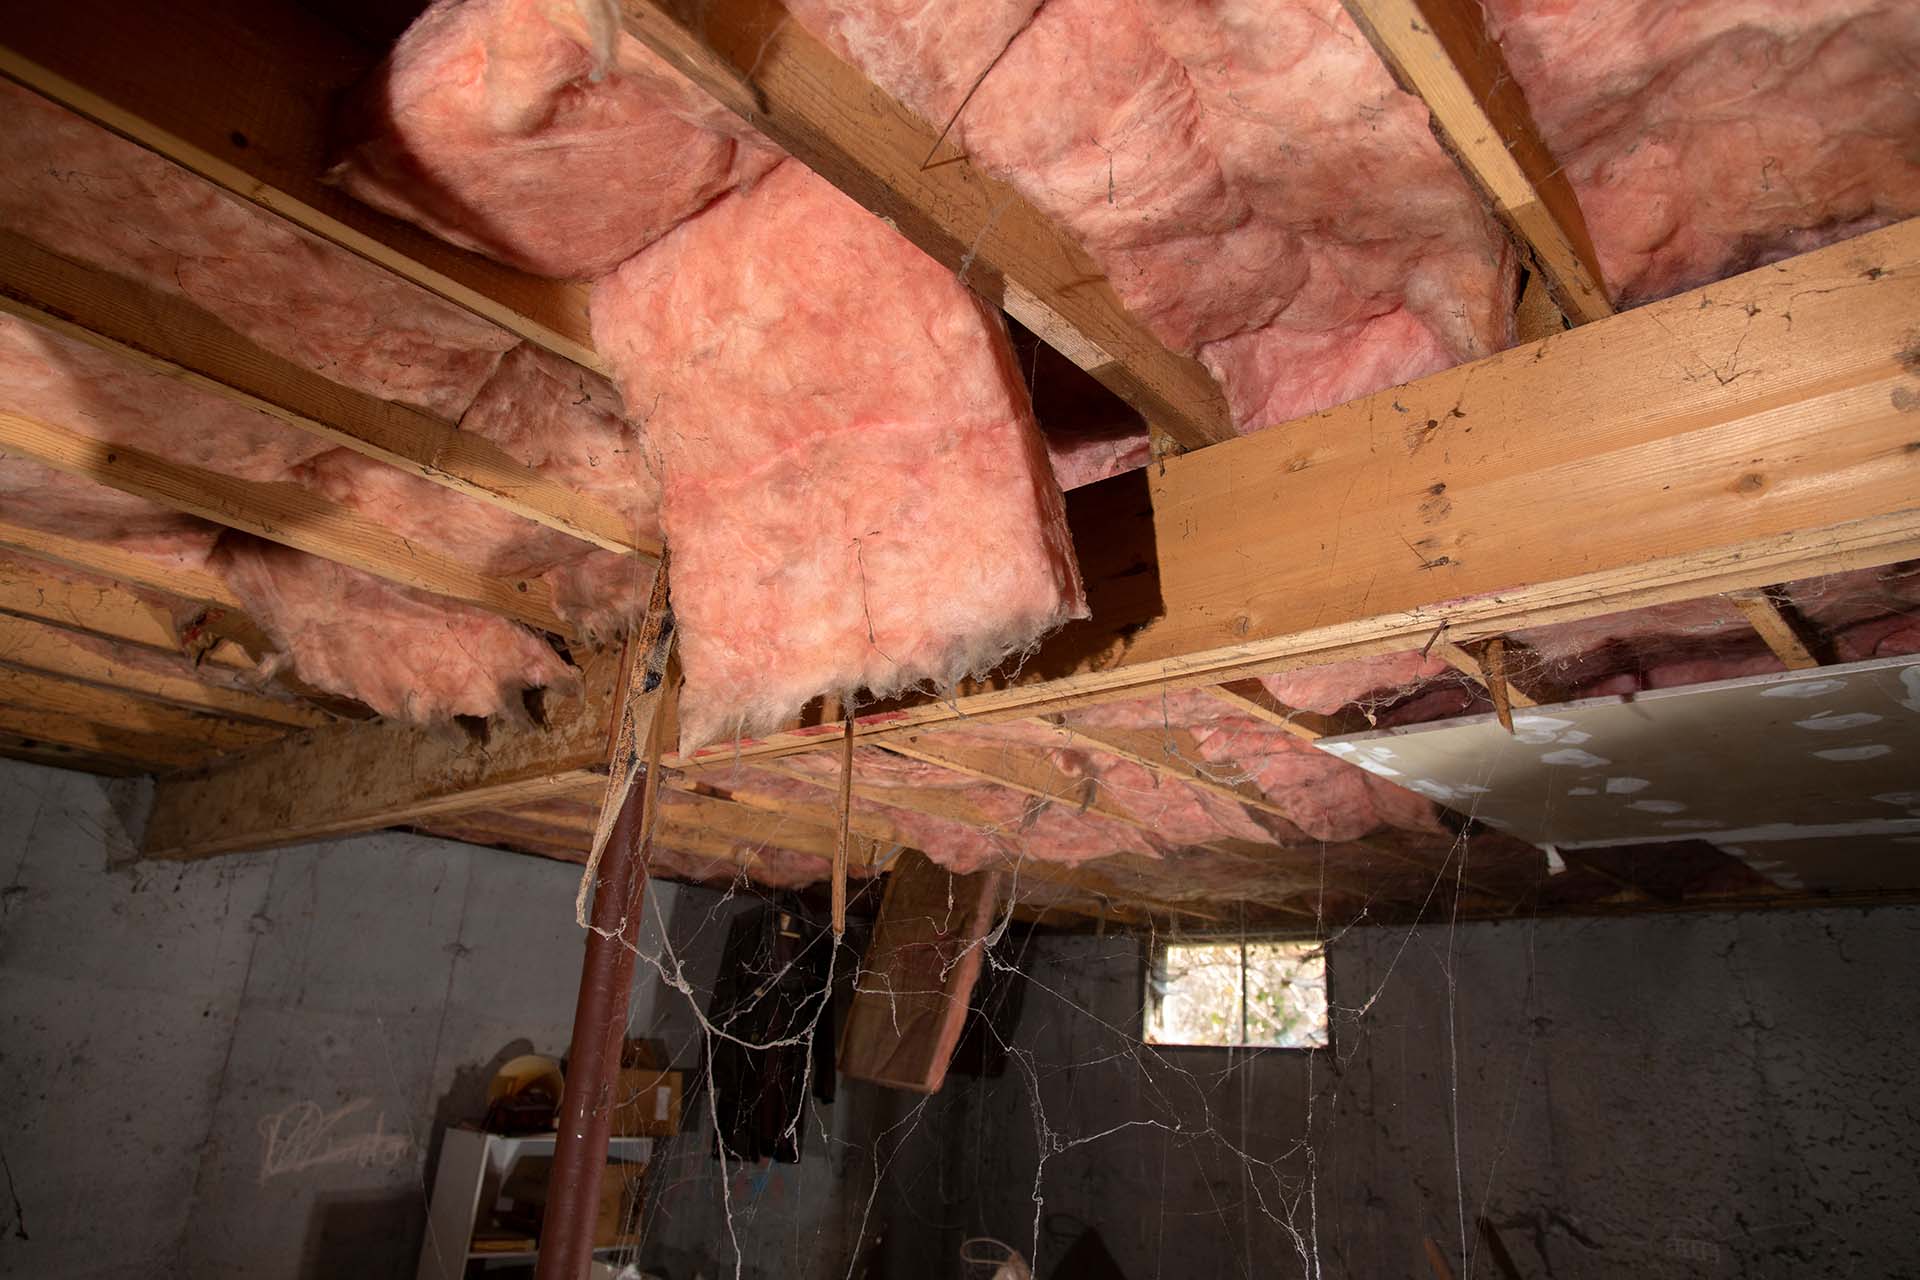 Wet Insulation in Crawl Space